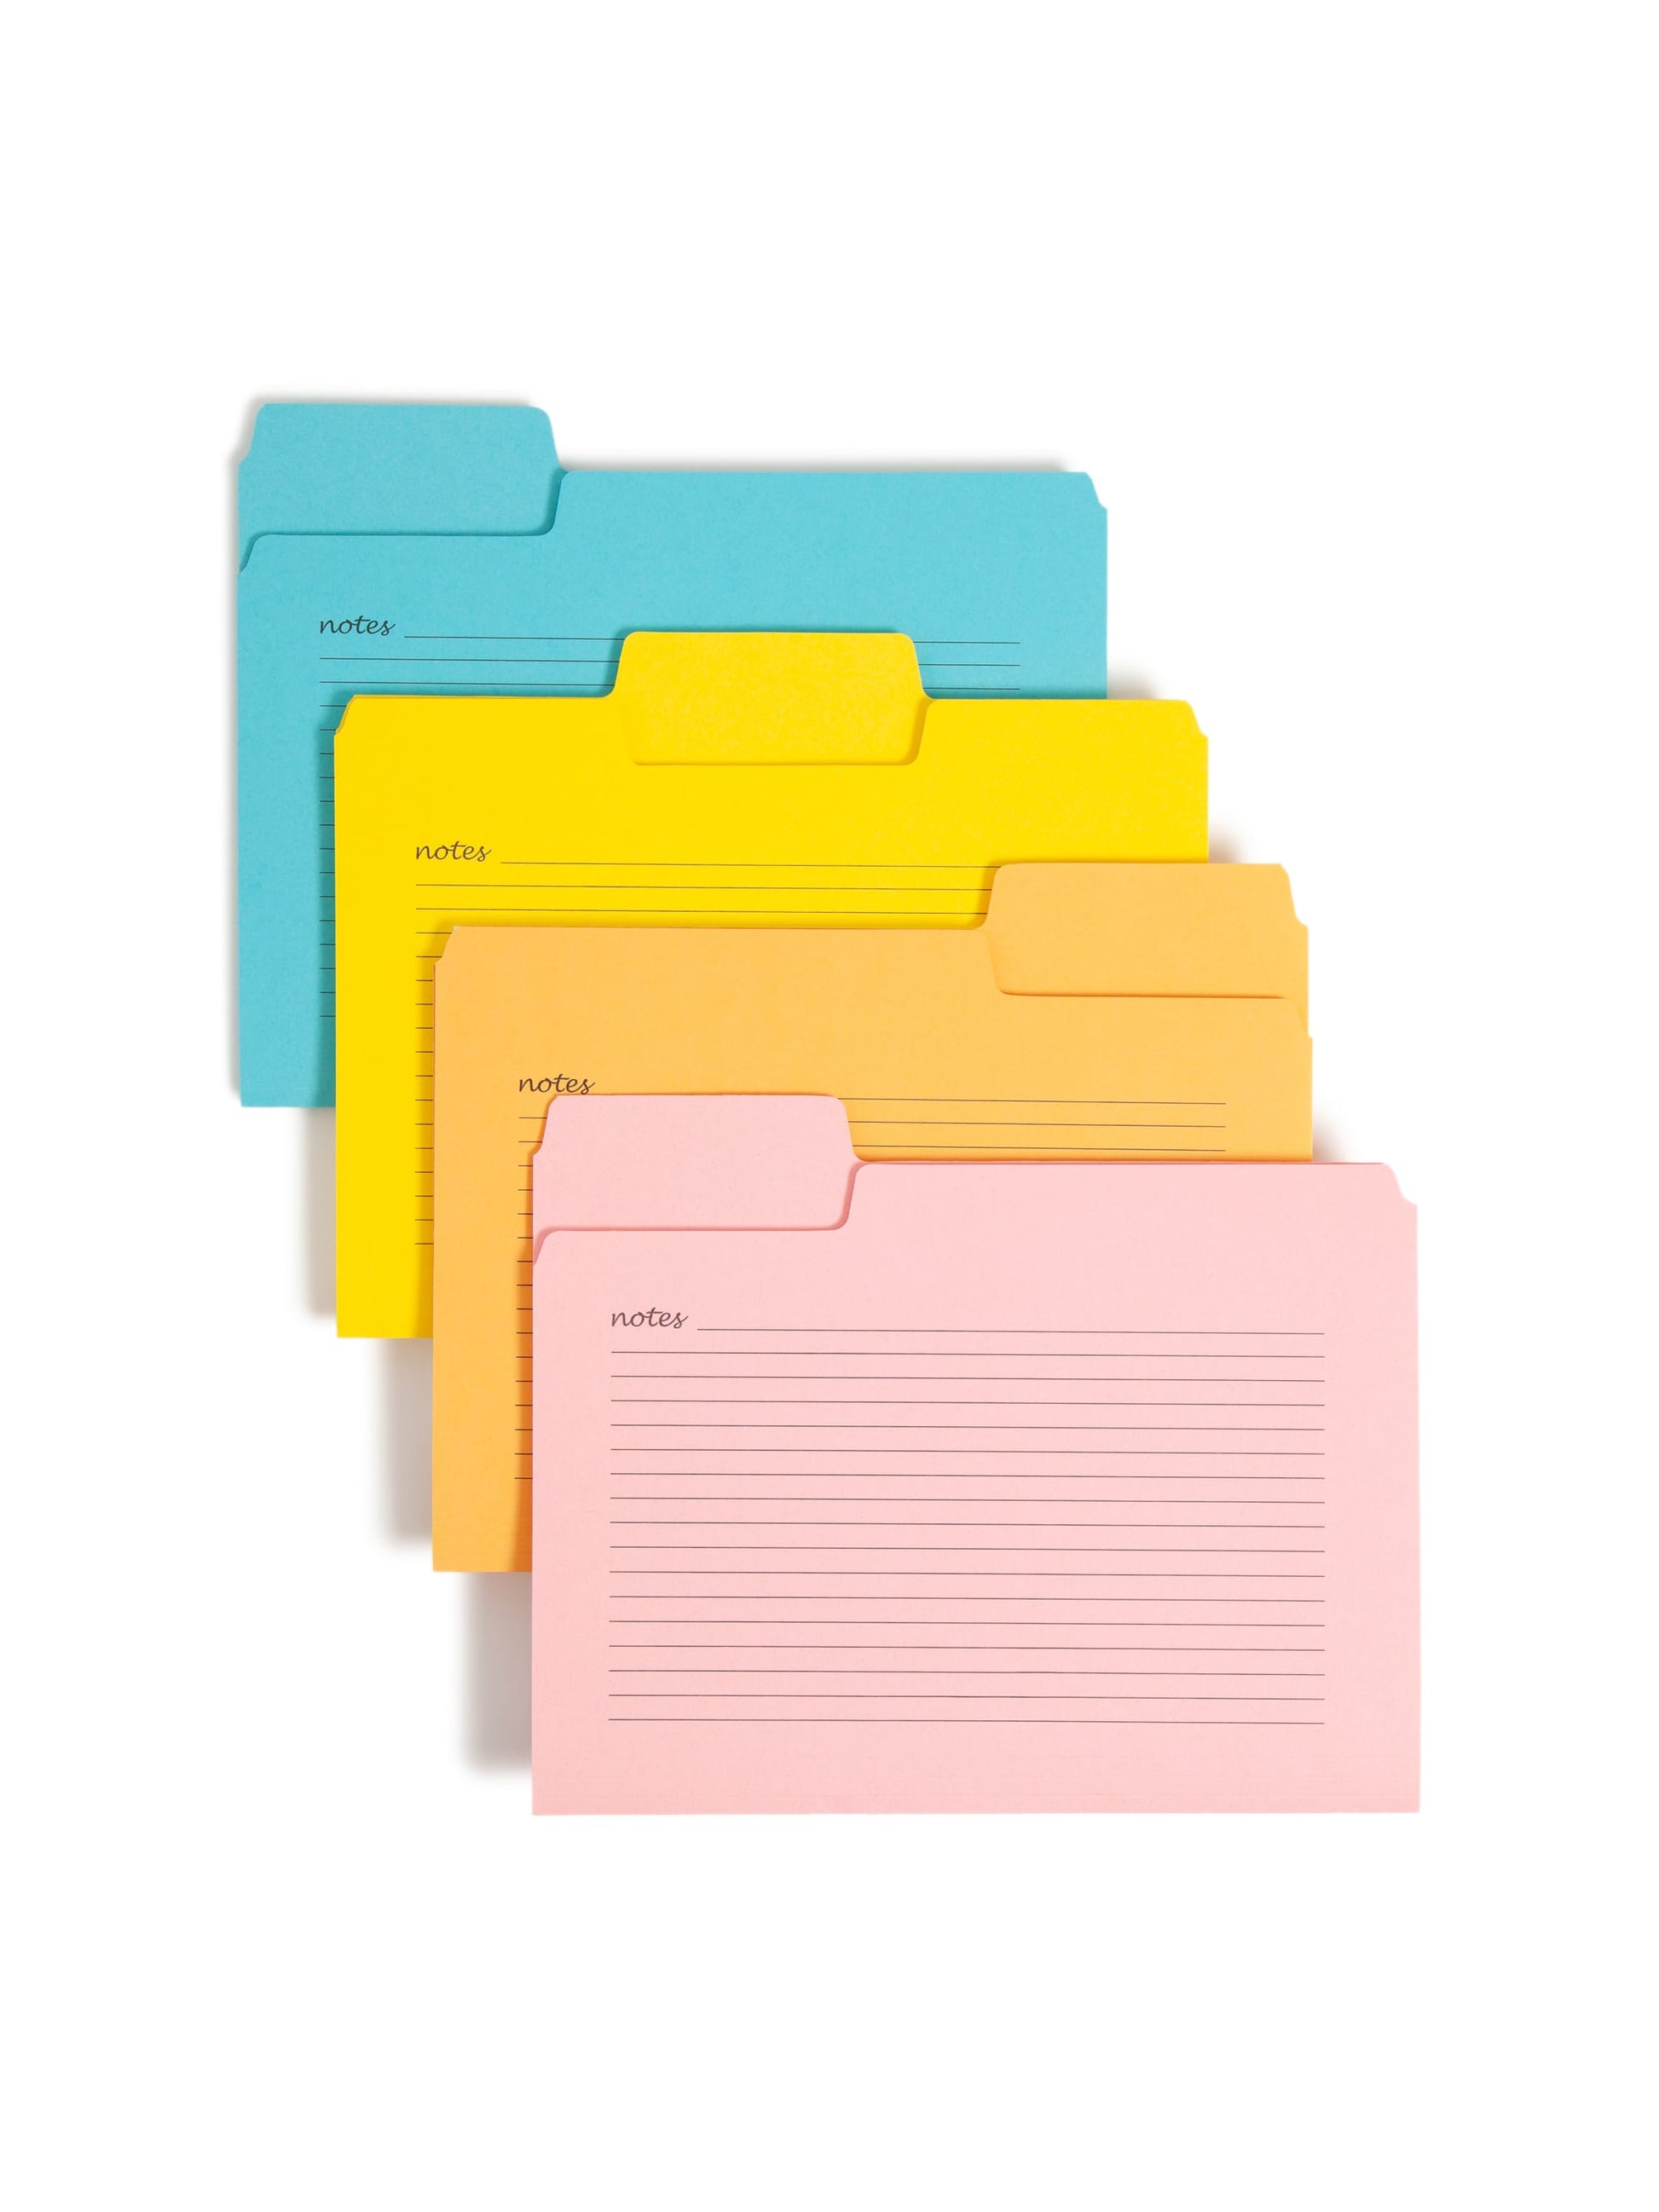 SuperTab® Notes File Folders, 1/3 Cut Tab, Assorted Colors Color, Letter Size, Set of 1, 086486116503